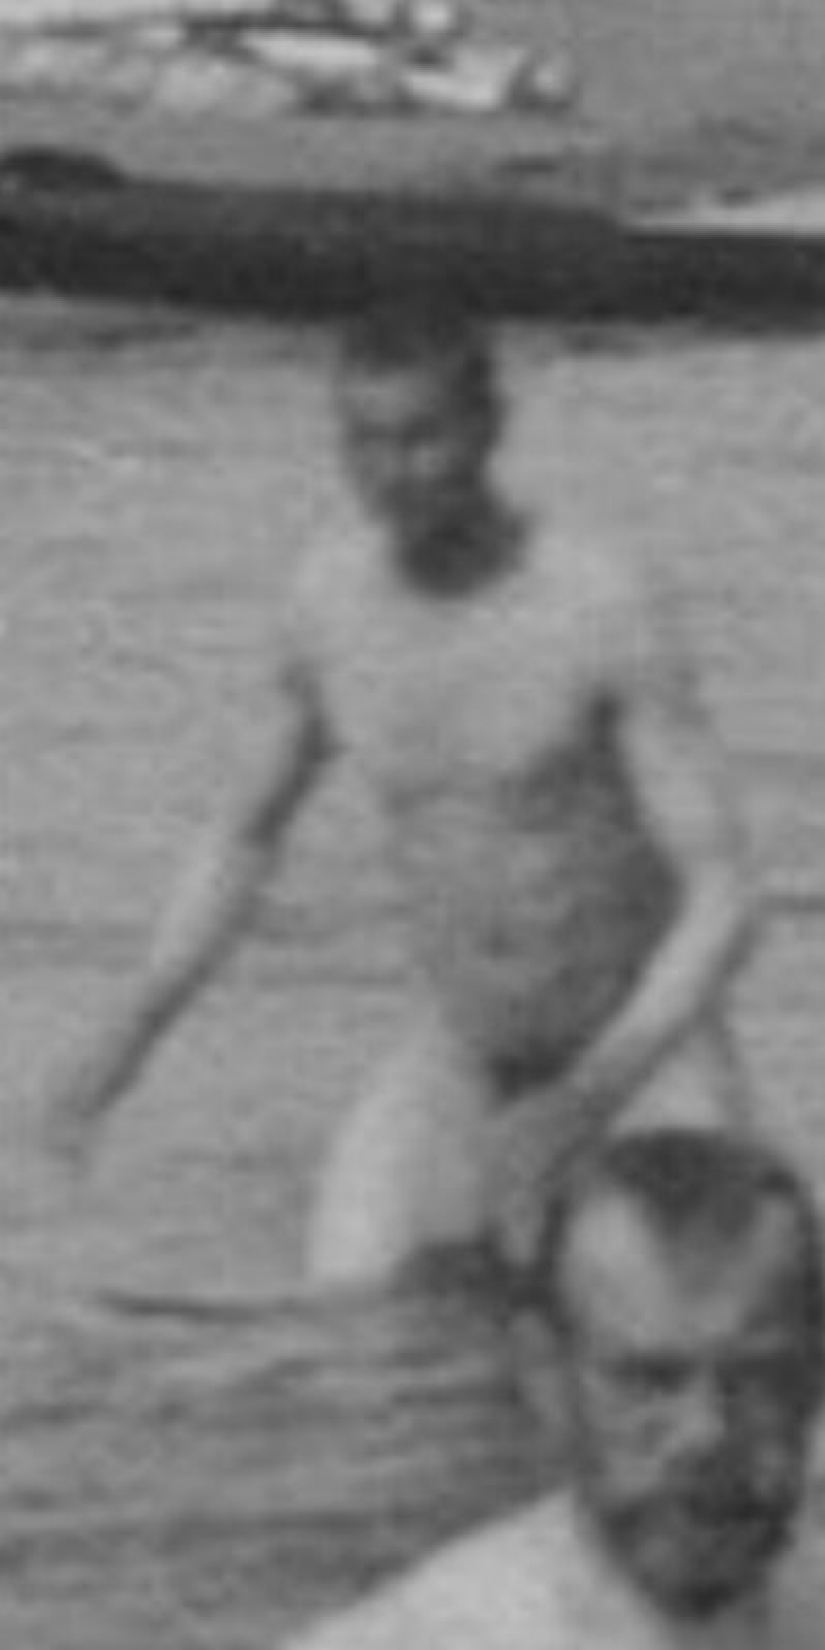 "And the tsar is naked!": foreigners were struck by nude photos of Emperor Nicholas II